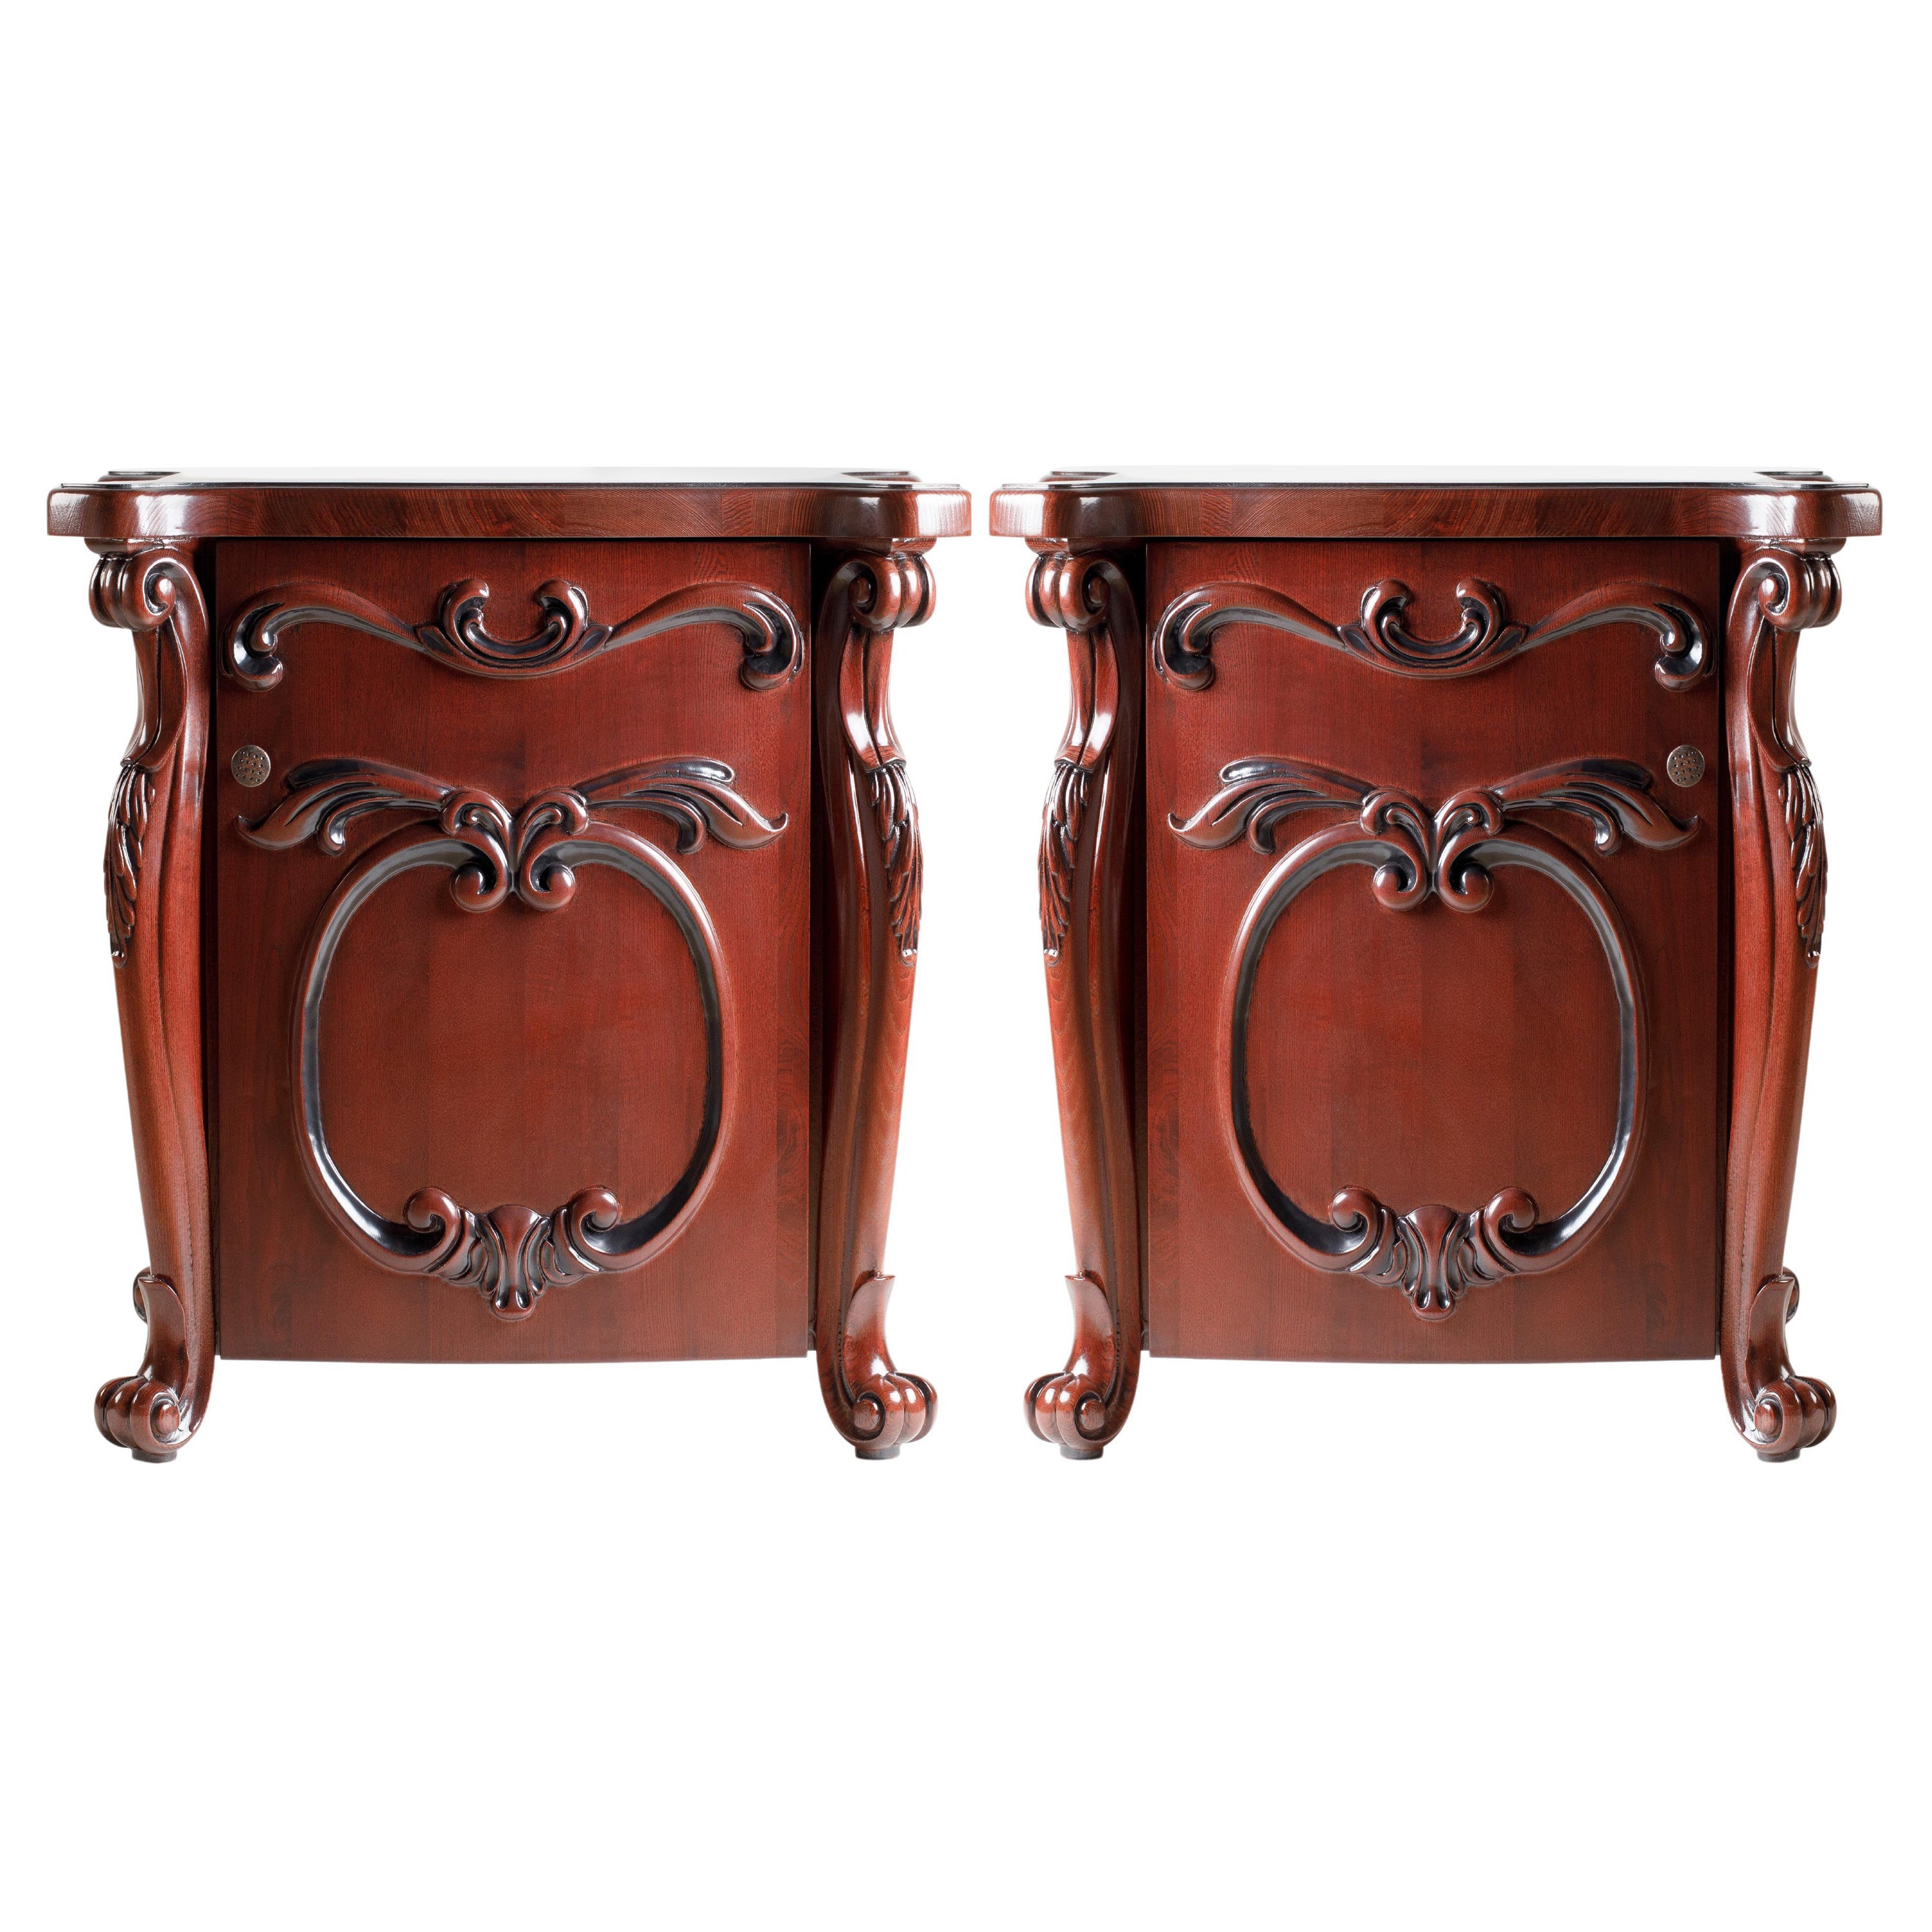 Rococo Style Carved Solid Wood Nightstands - A Pair For Sale